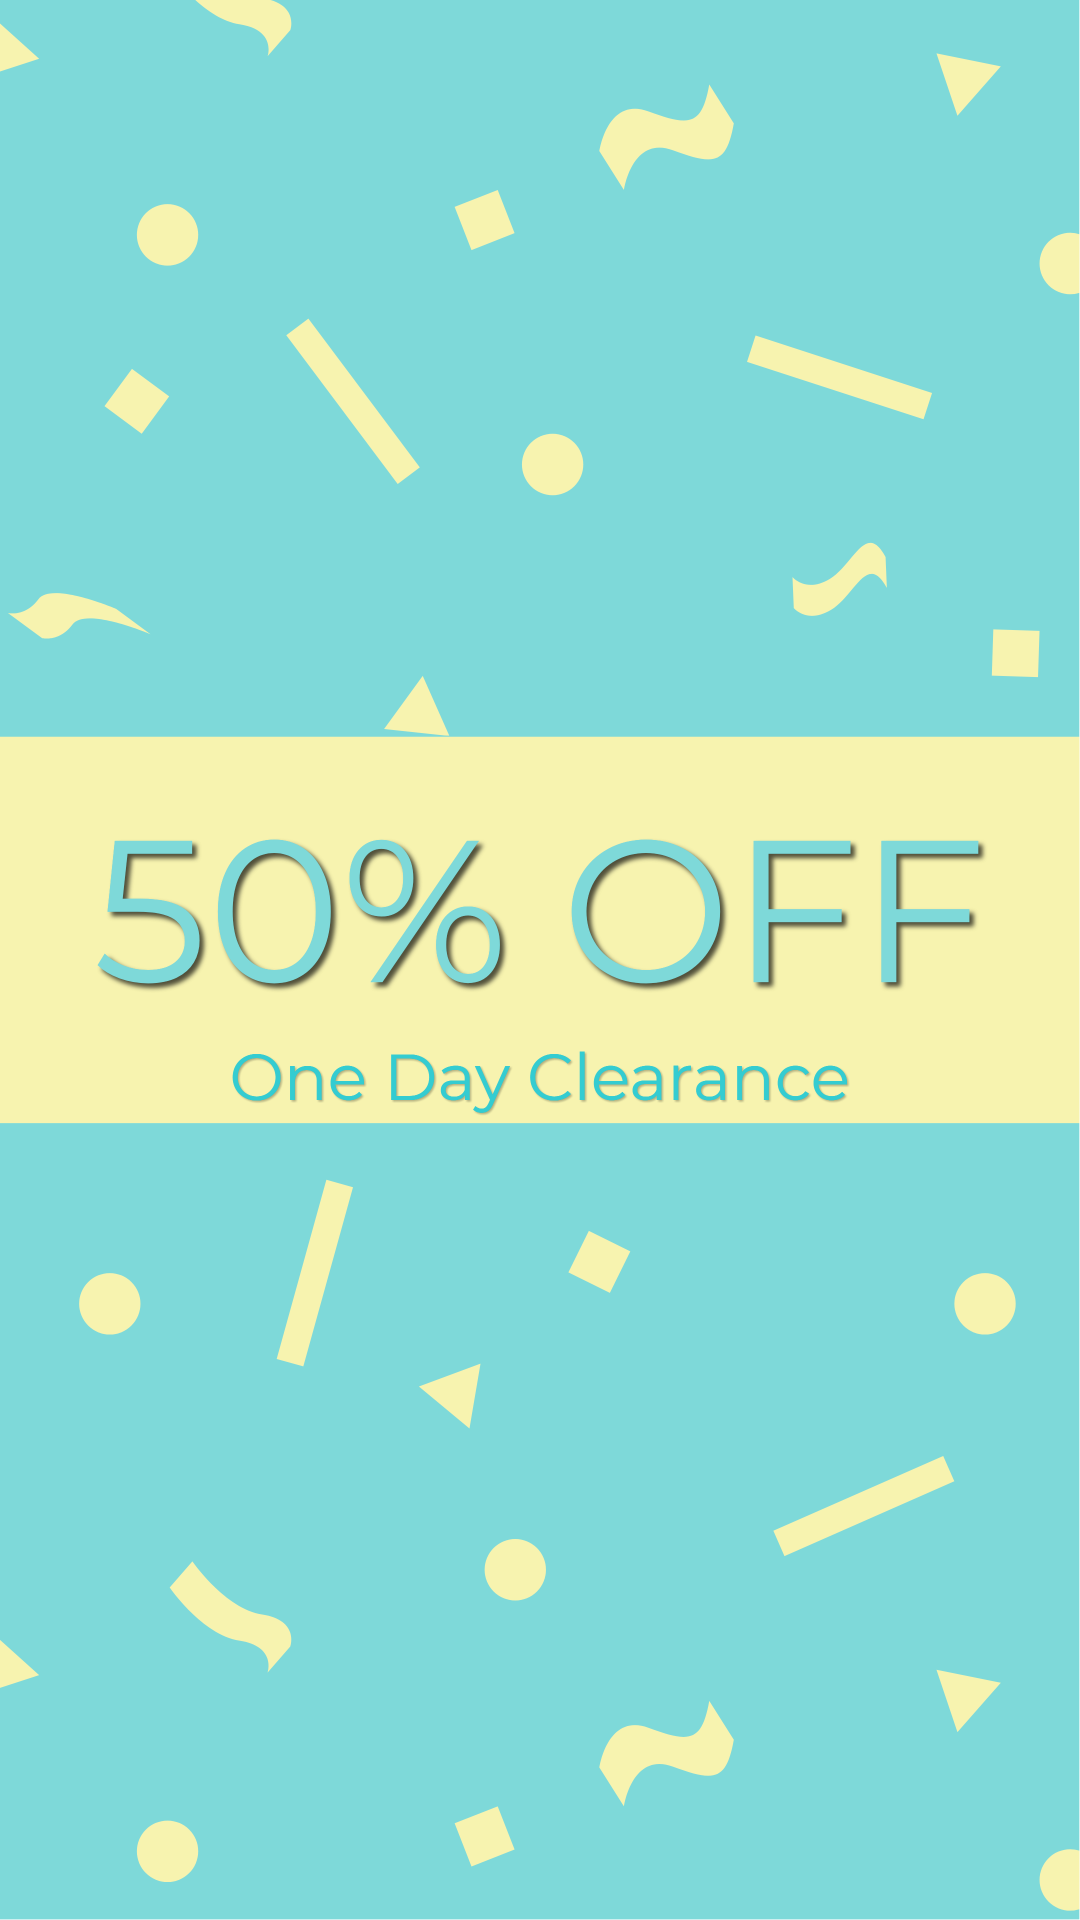 50% off - One day clearance